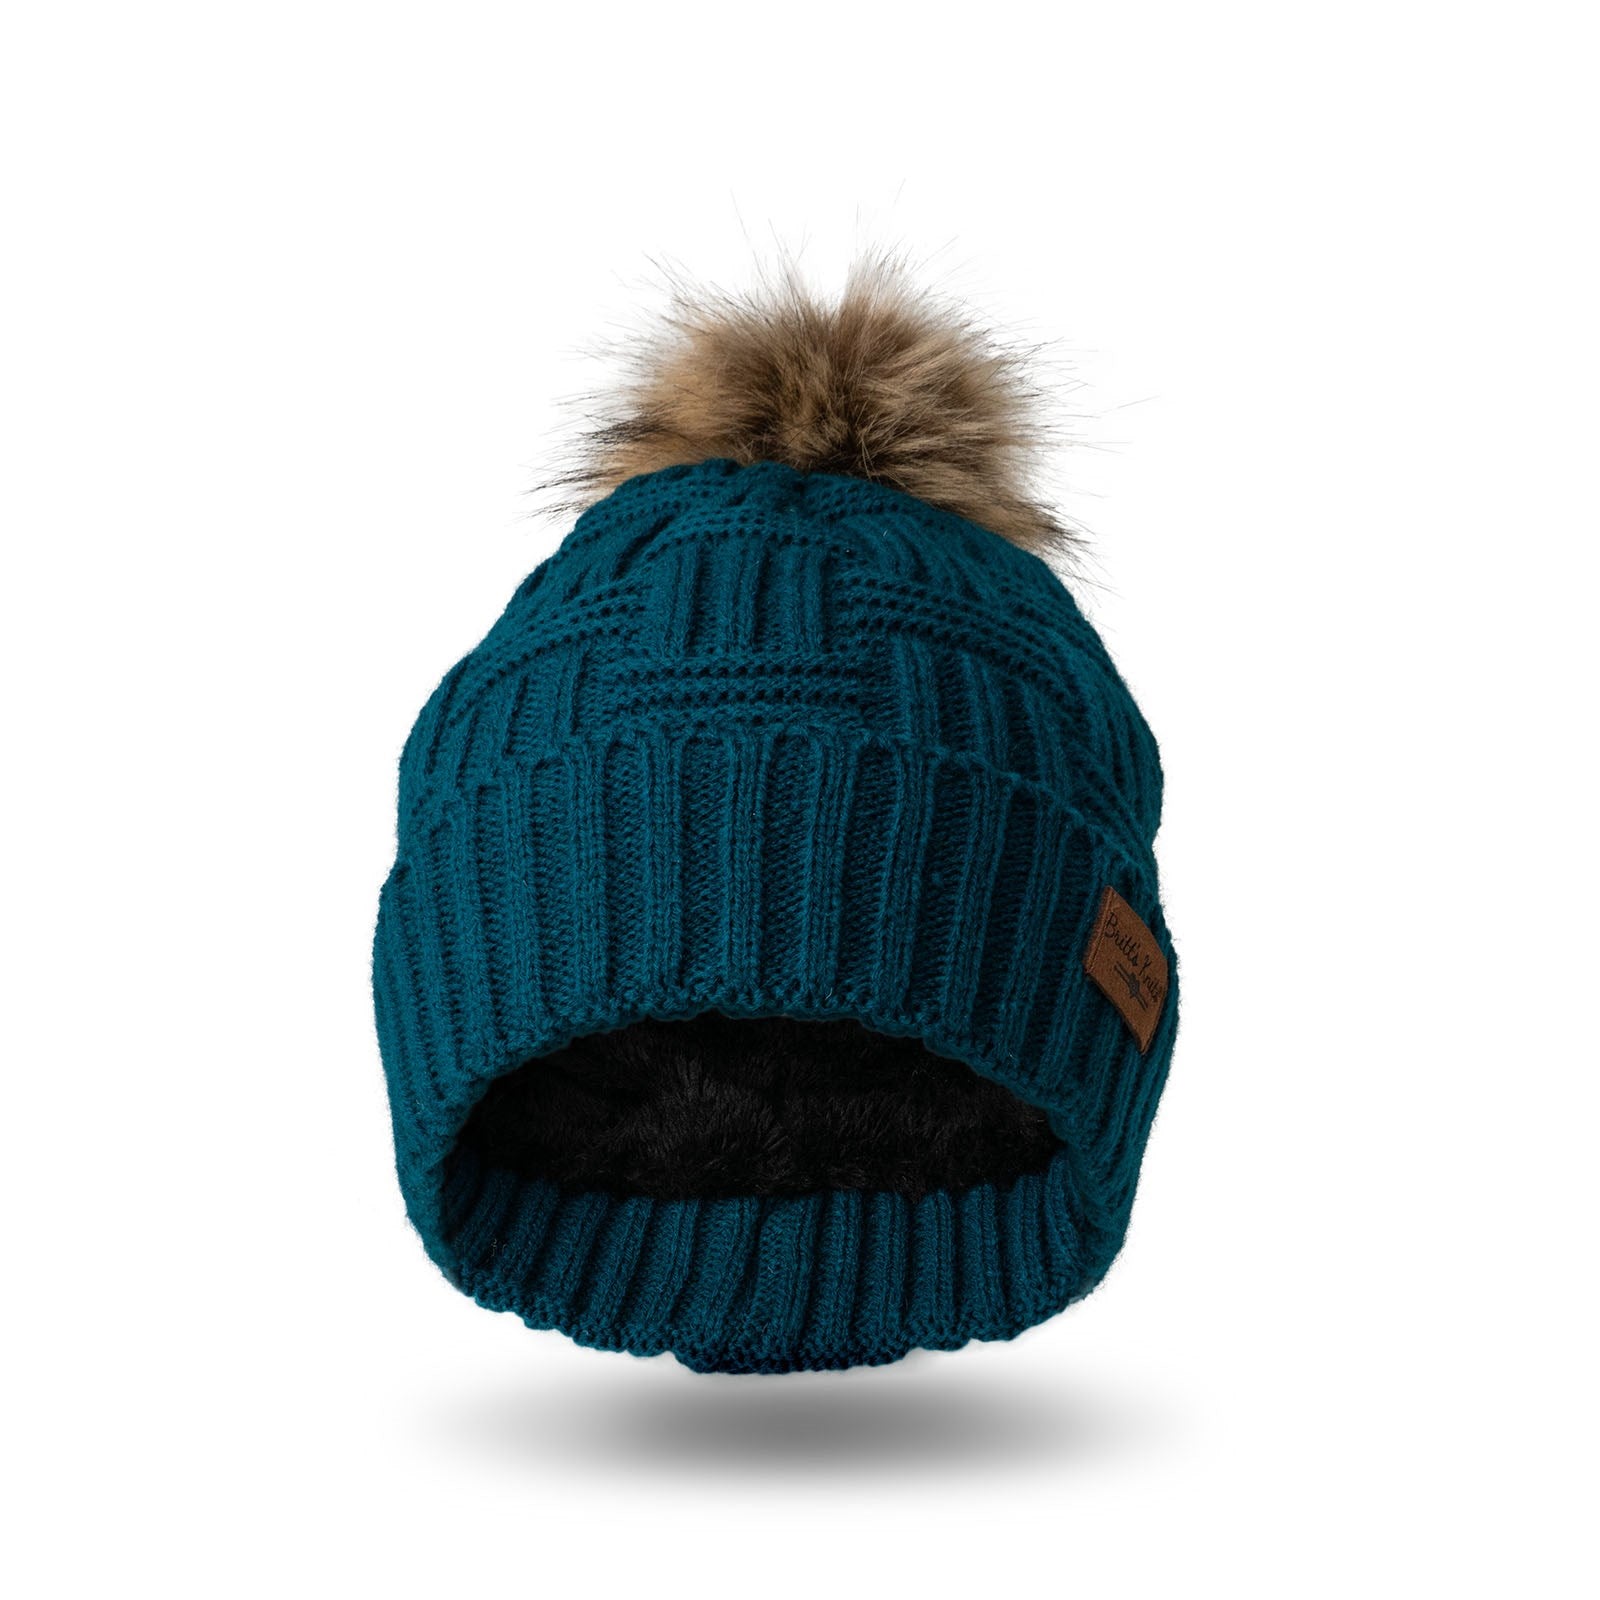 Britt's Knits Women's Plush-Lined Knit Hat with Pom, Teal, One Size